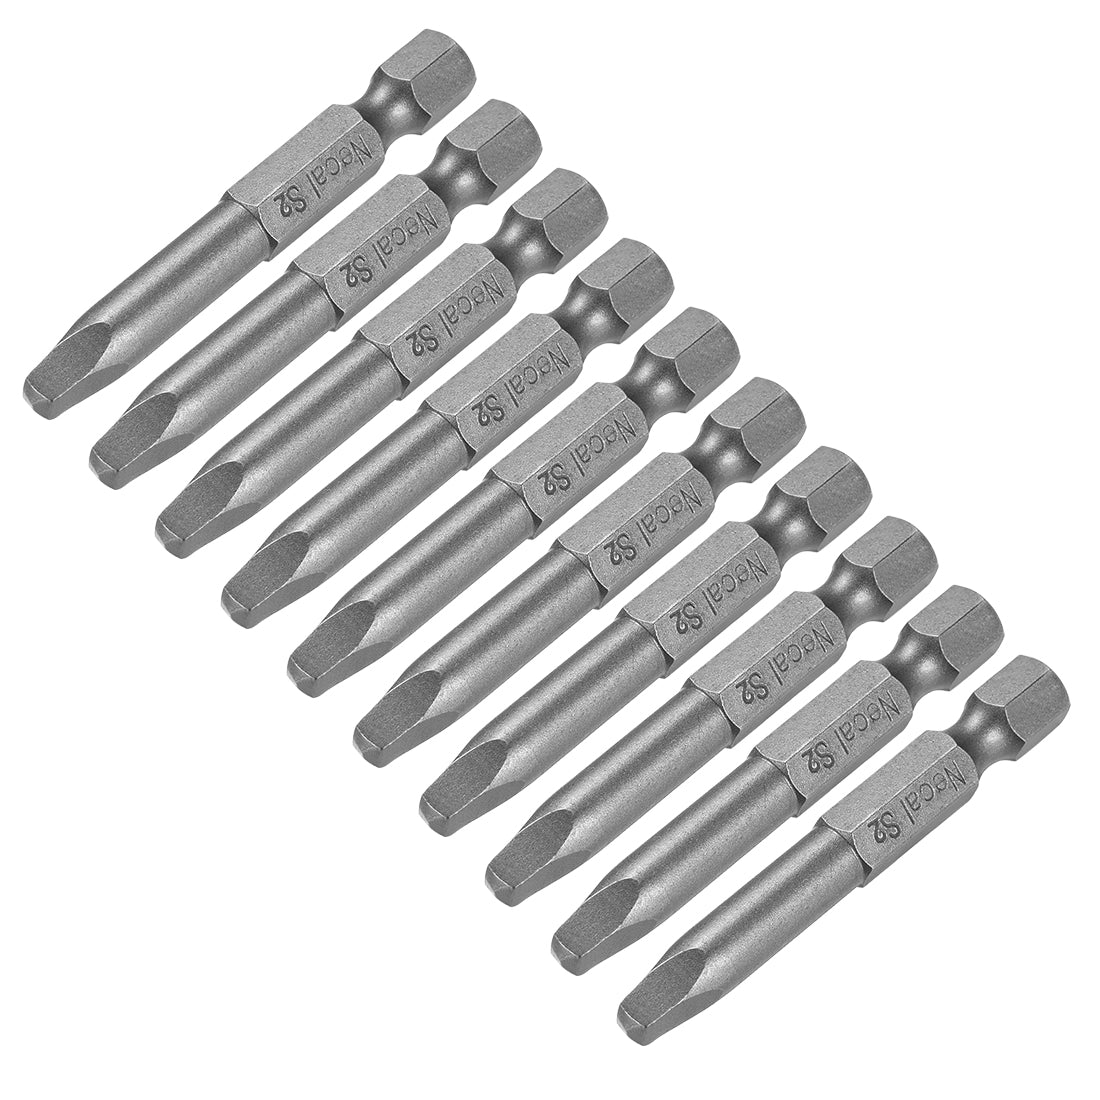 uxcell Uxcell 1/4-Inch Hex Shank 50mm Length Square Head SQ3 Magnetic Screw Driver S2 Screwdriver Bits 10pcs